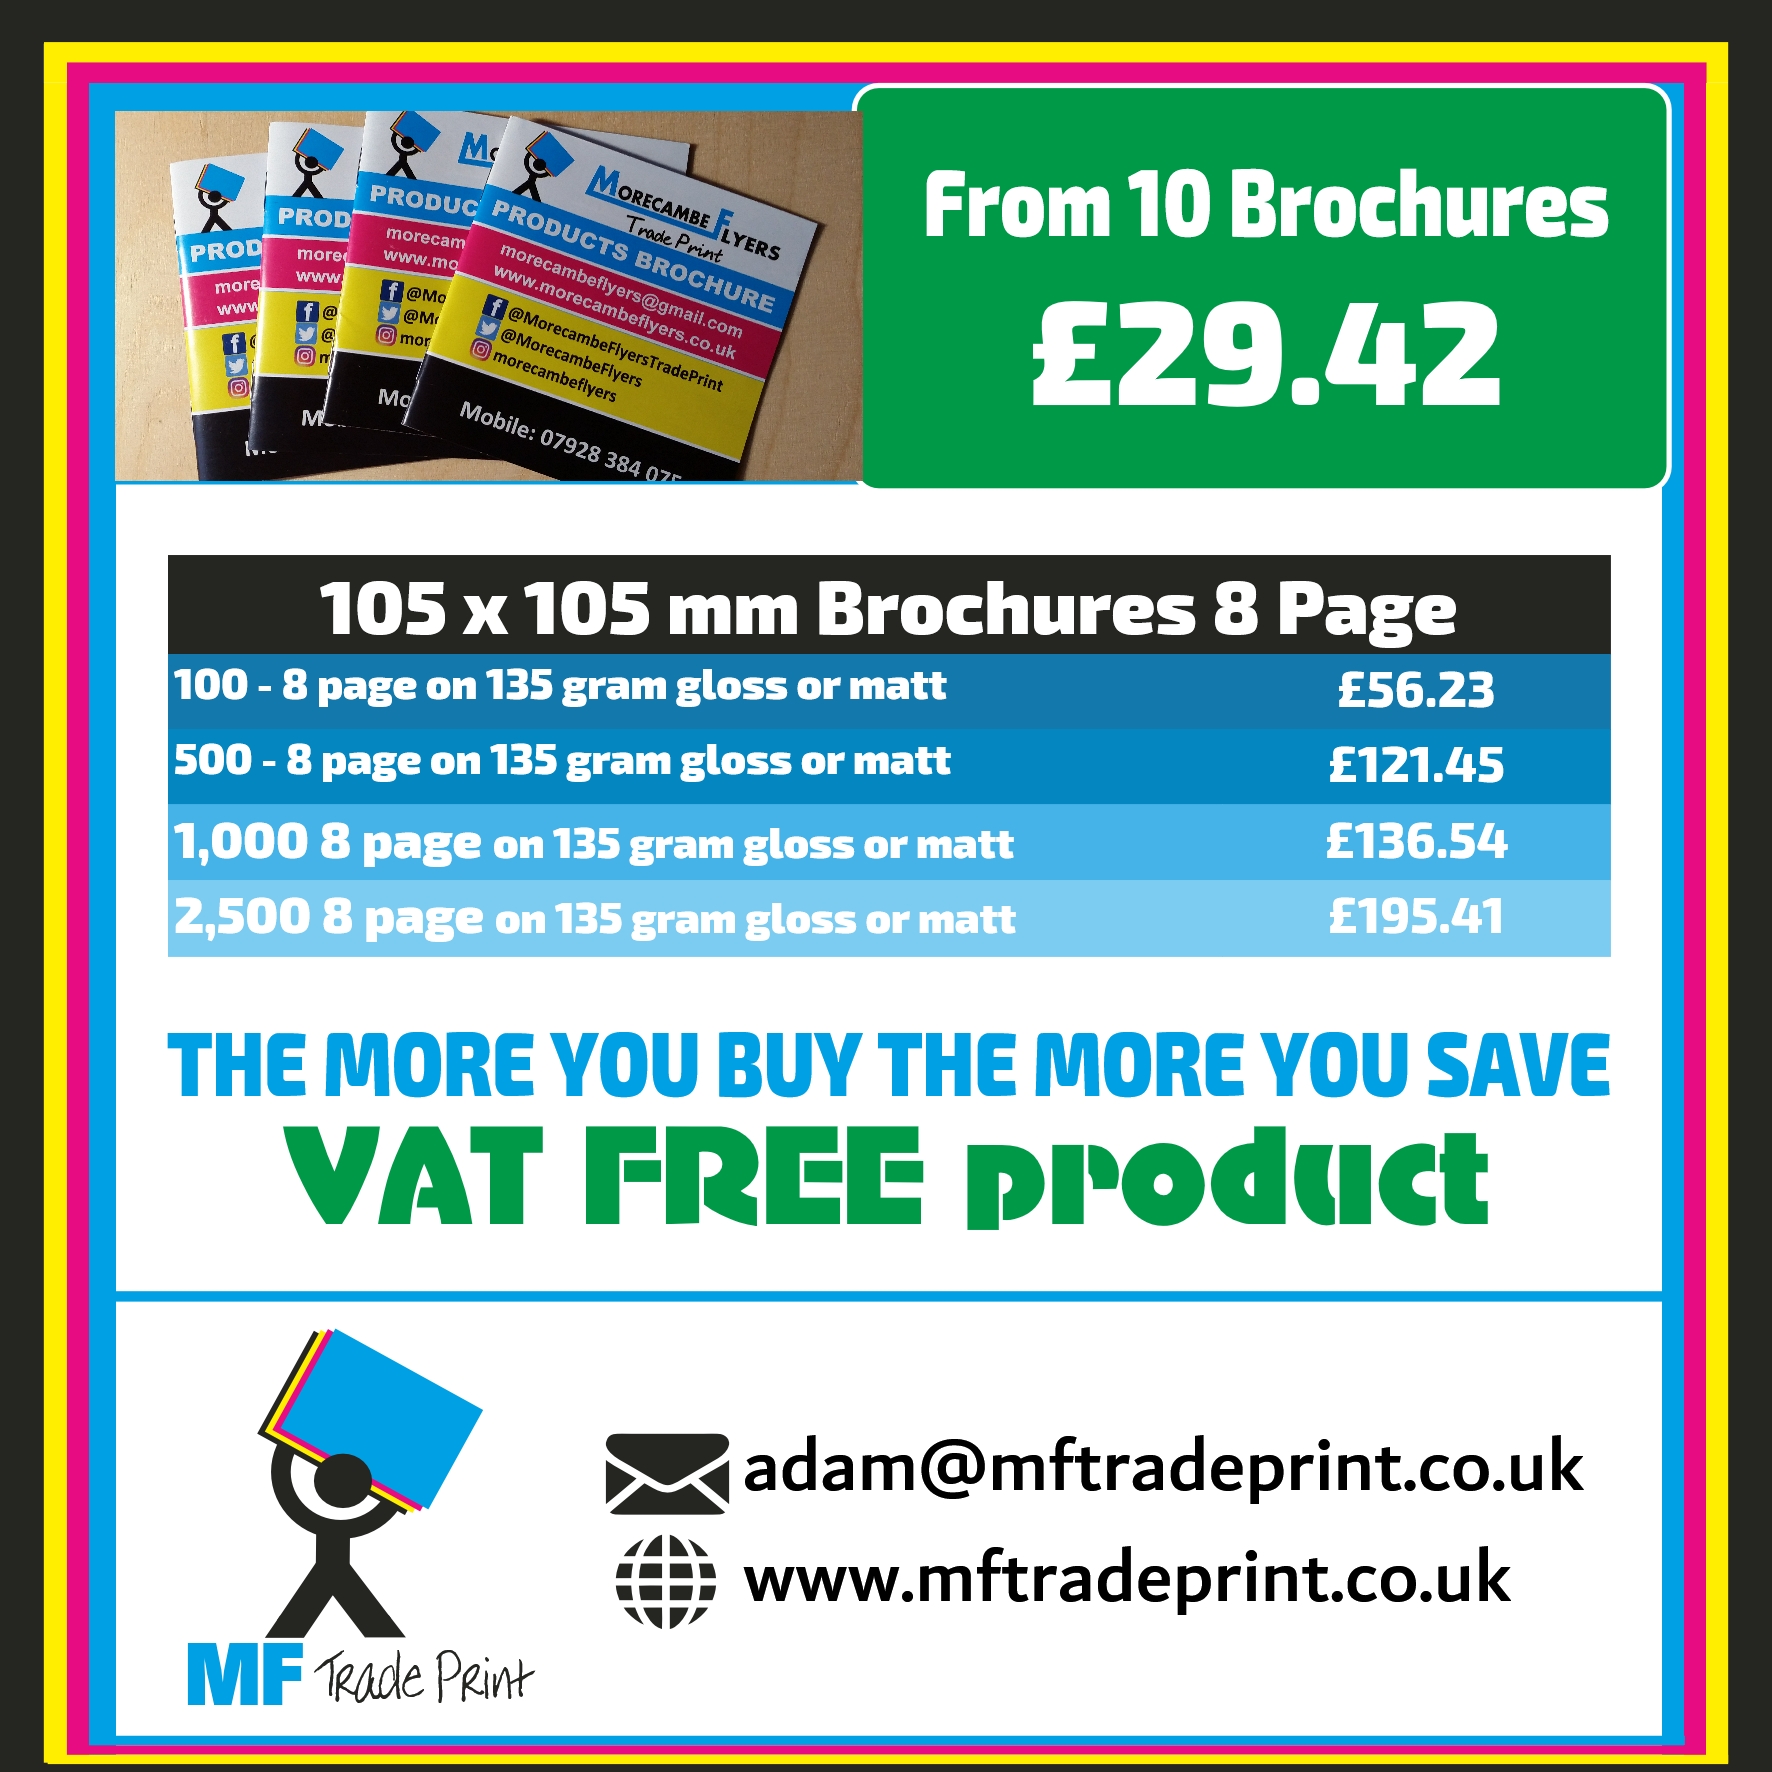 8 page stapled Brochures printed full colour and vat free